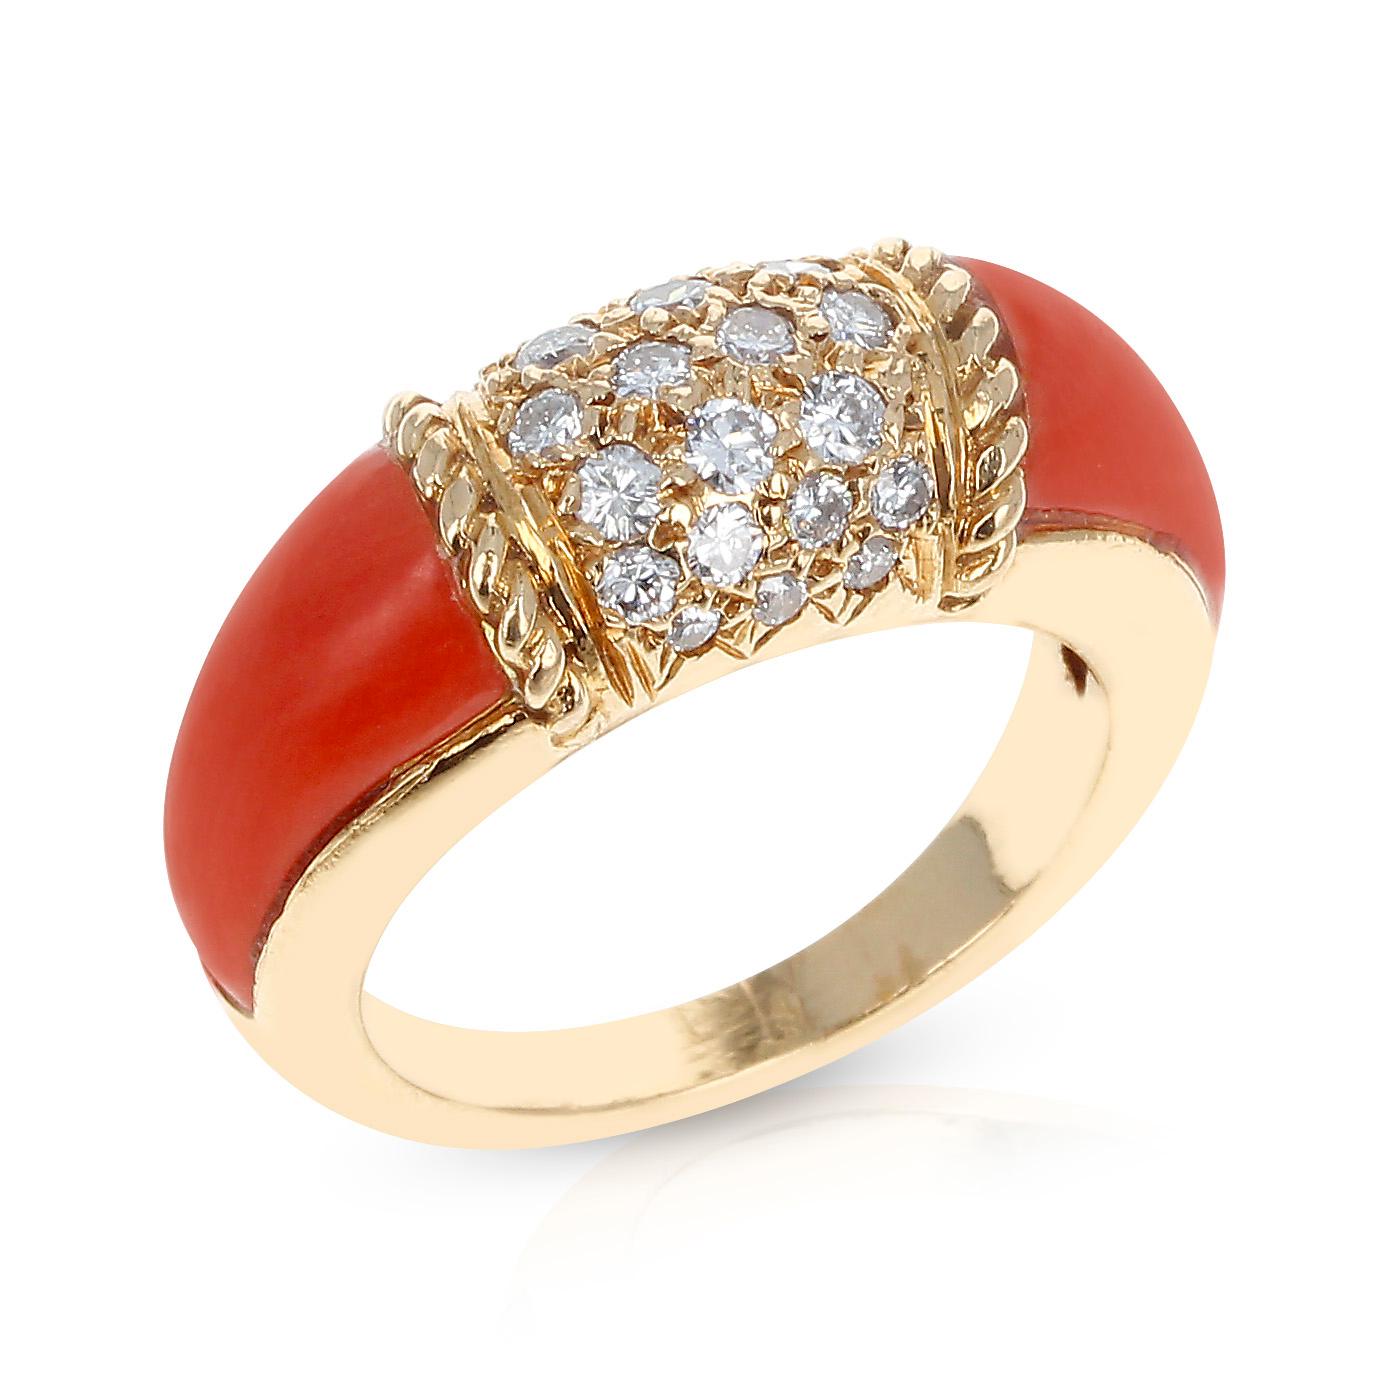 A Van Cleef & Arpels Ring with Two Carved Coral Inlays and 7 Row Diamond Stacking Philippine Ring made in 18K Yellow Gold. There are 7 rows of diamonds, totaling to 24 round diamonds, and it is common to see these with 5 rows and 18 diamonds total,